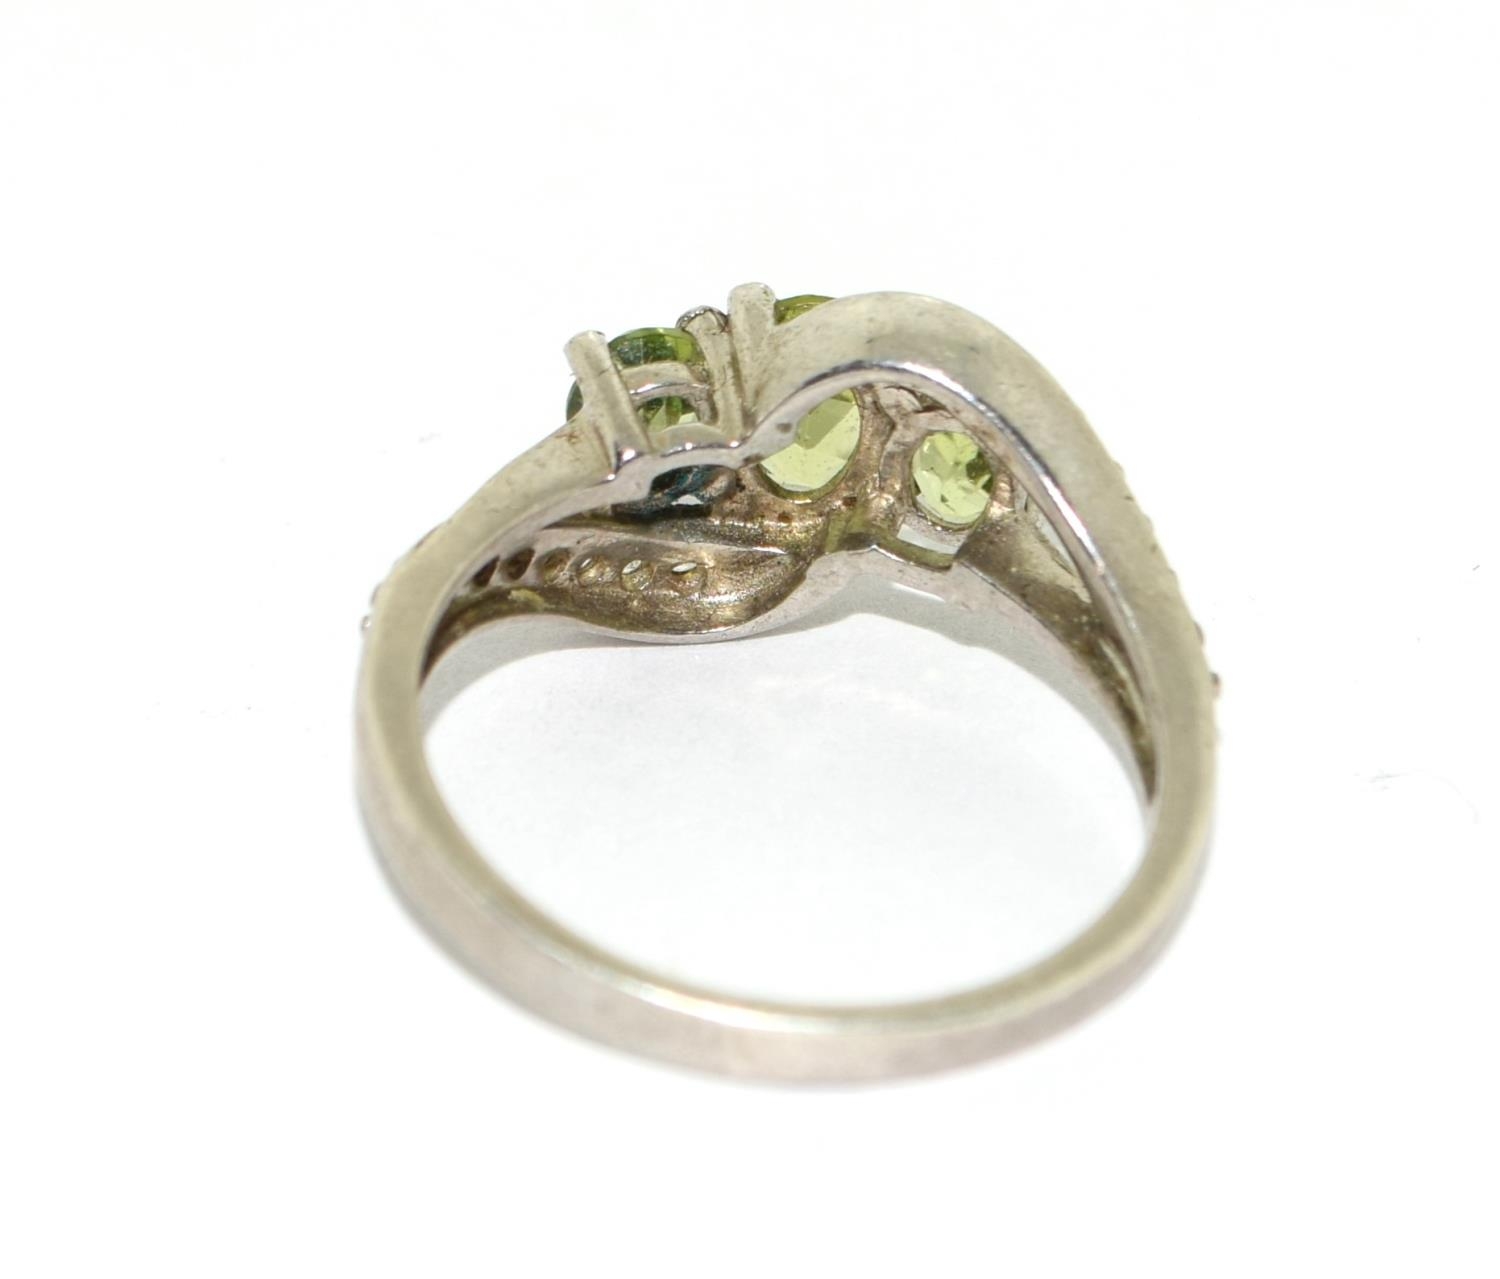 925 silver Peridot and Diamond sweep ring size R - Image 3 of 3